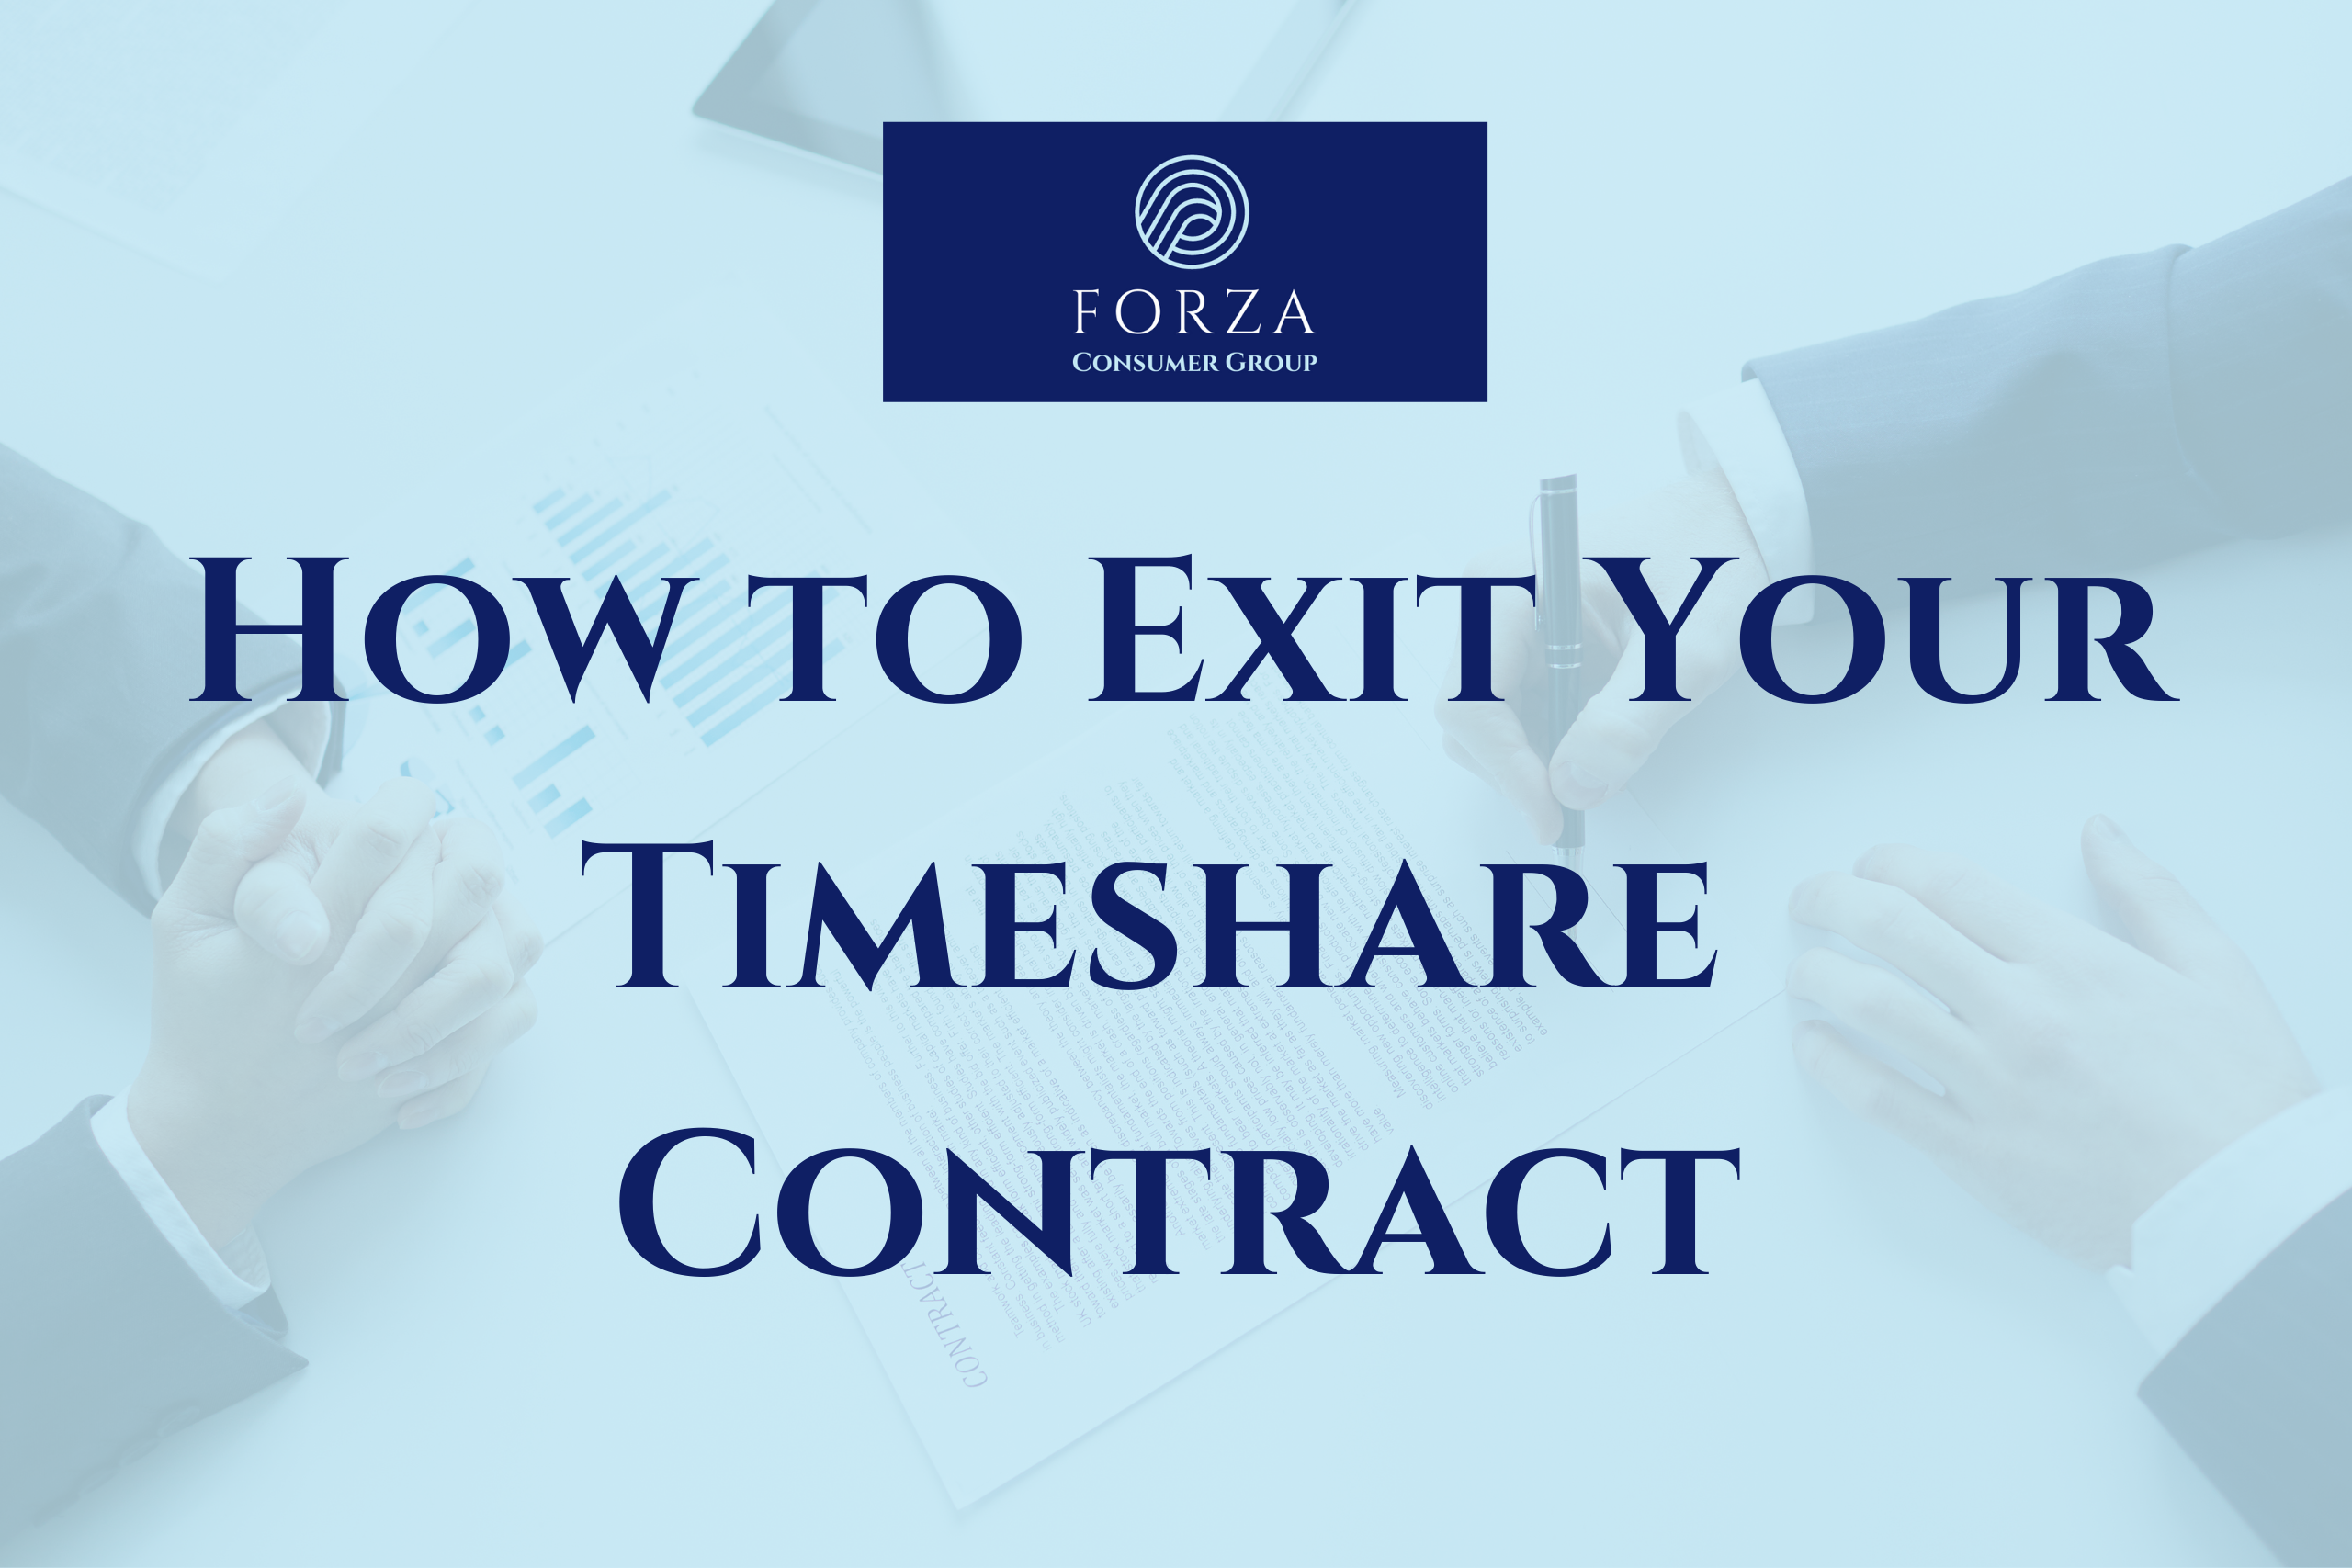 How to Exit Your Timeshare Contract featured image for forza consumer group